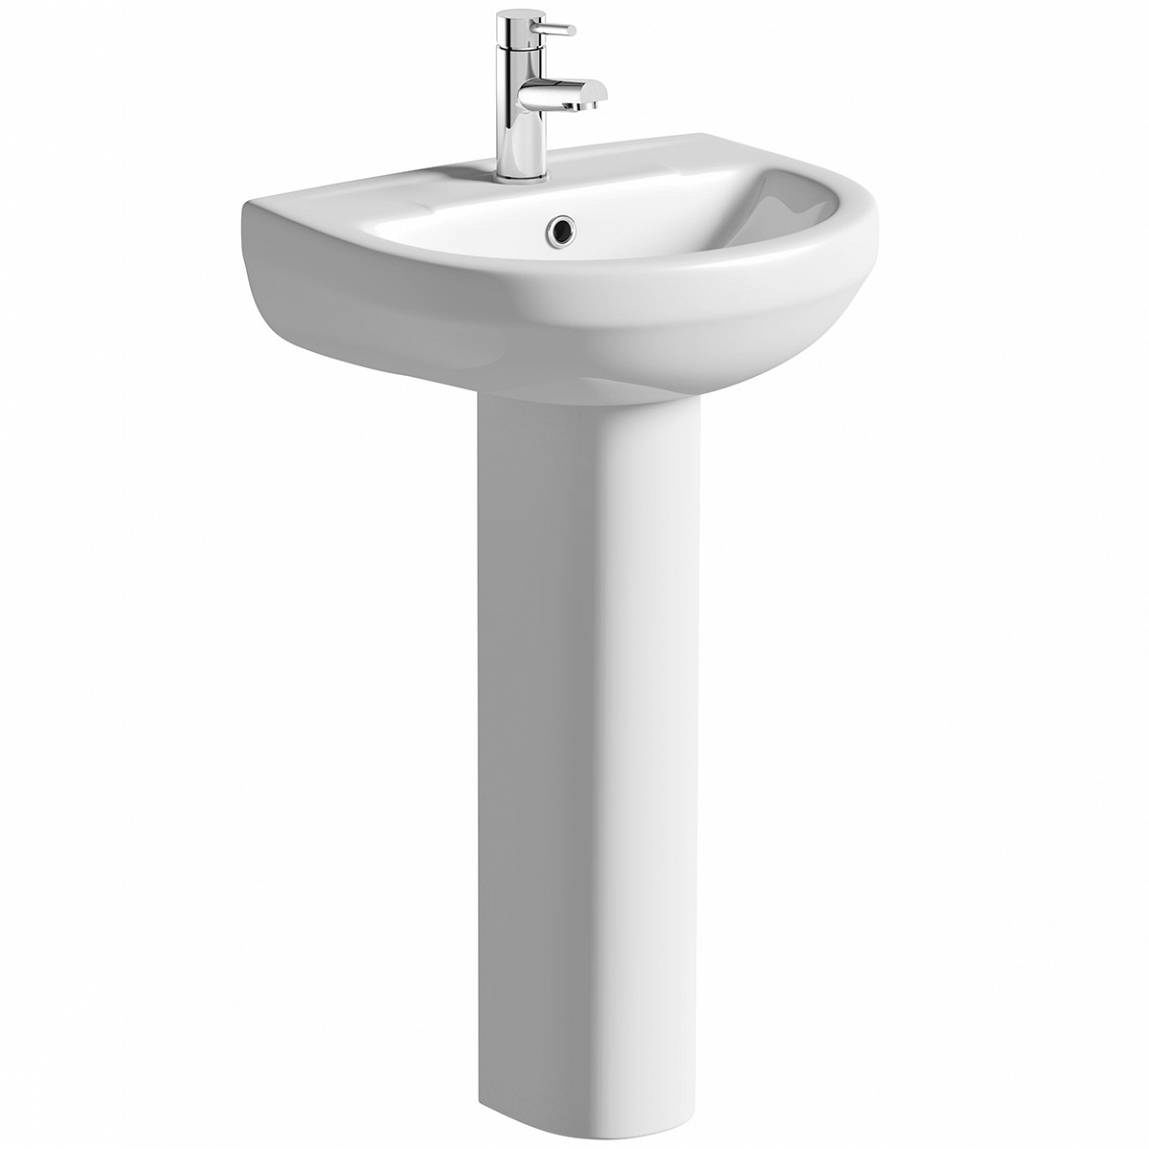 Orchard Eden 1 tap hole full pedestal basin 500mm with tap